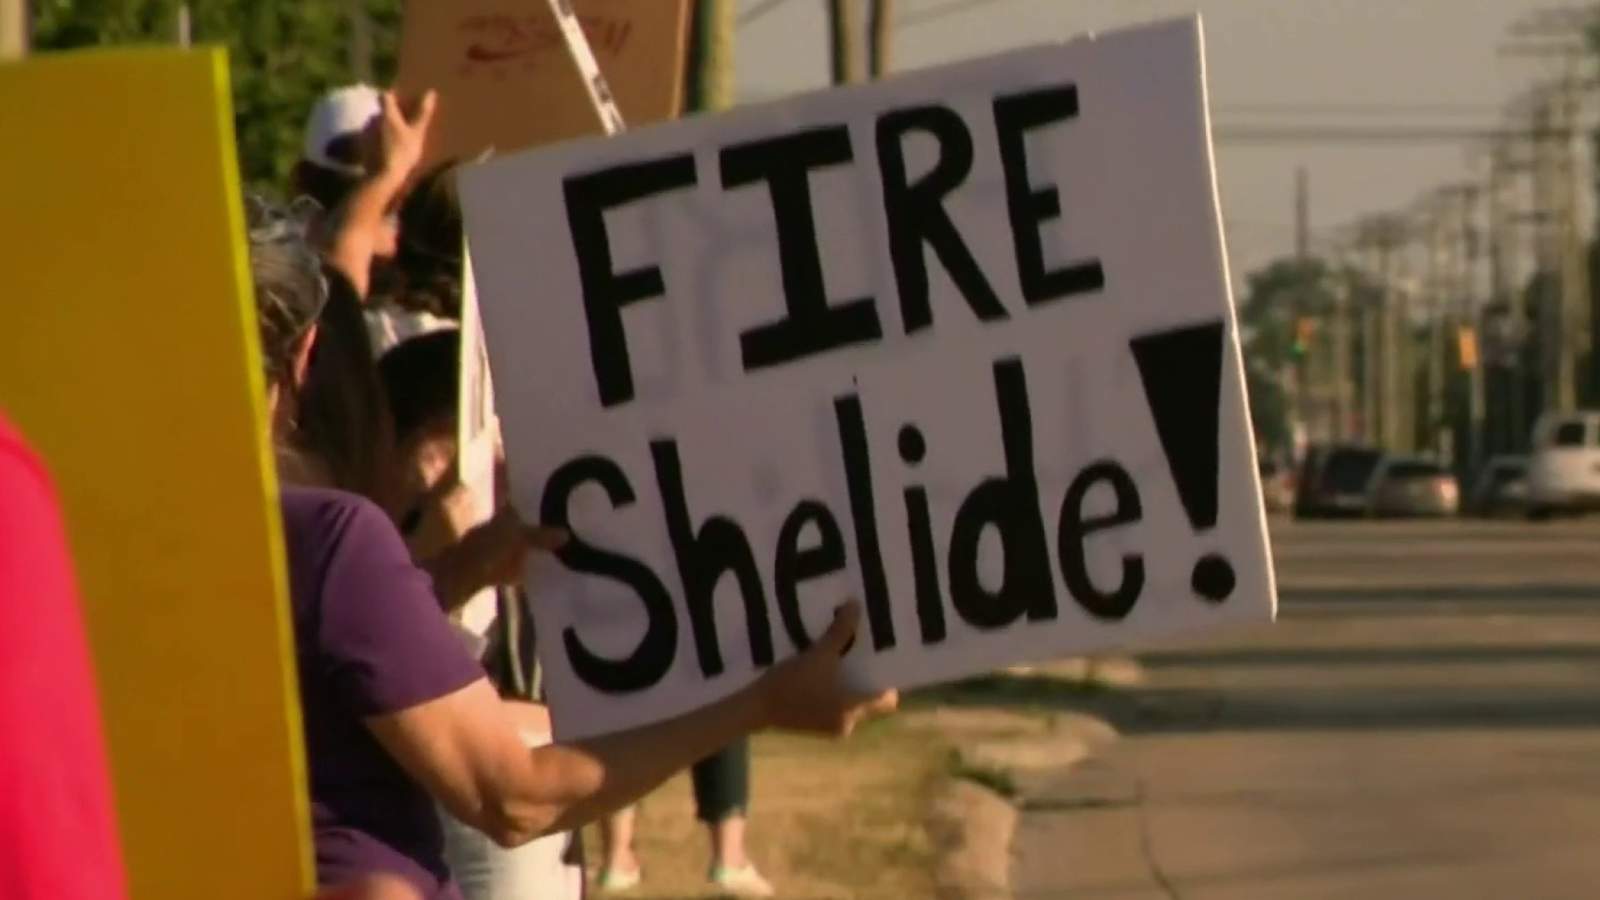 Protests against police chief, trustee escalate in Shelby Township